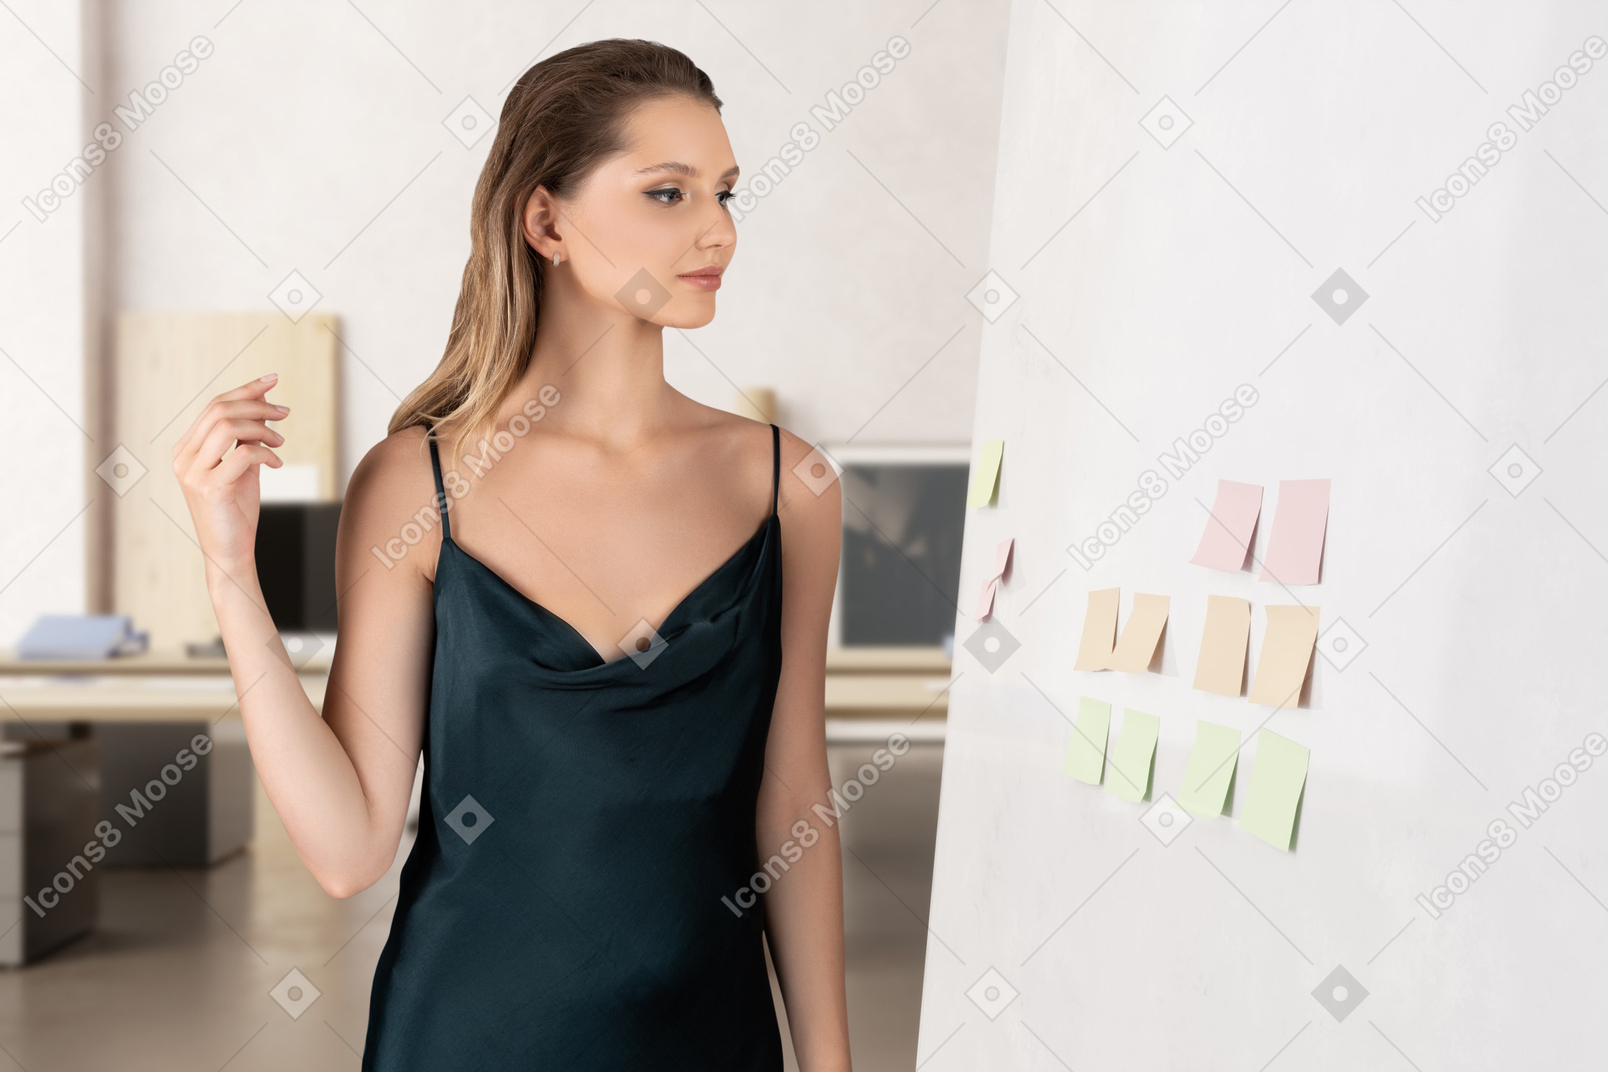 A woman in black dress standing in the office